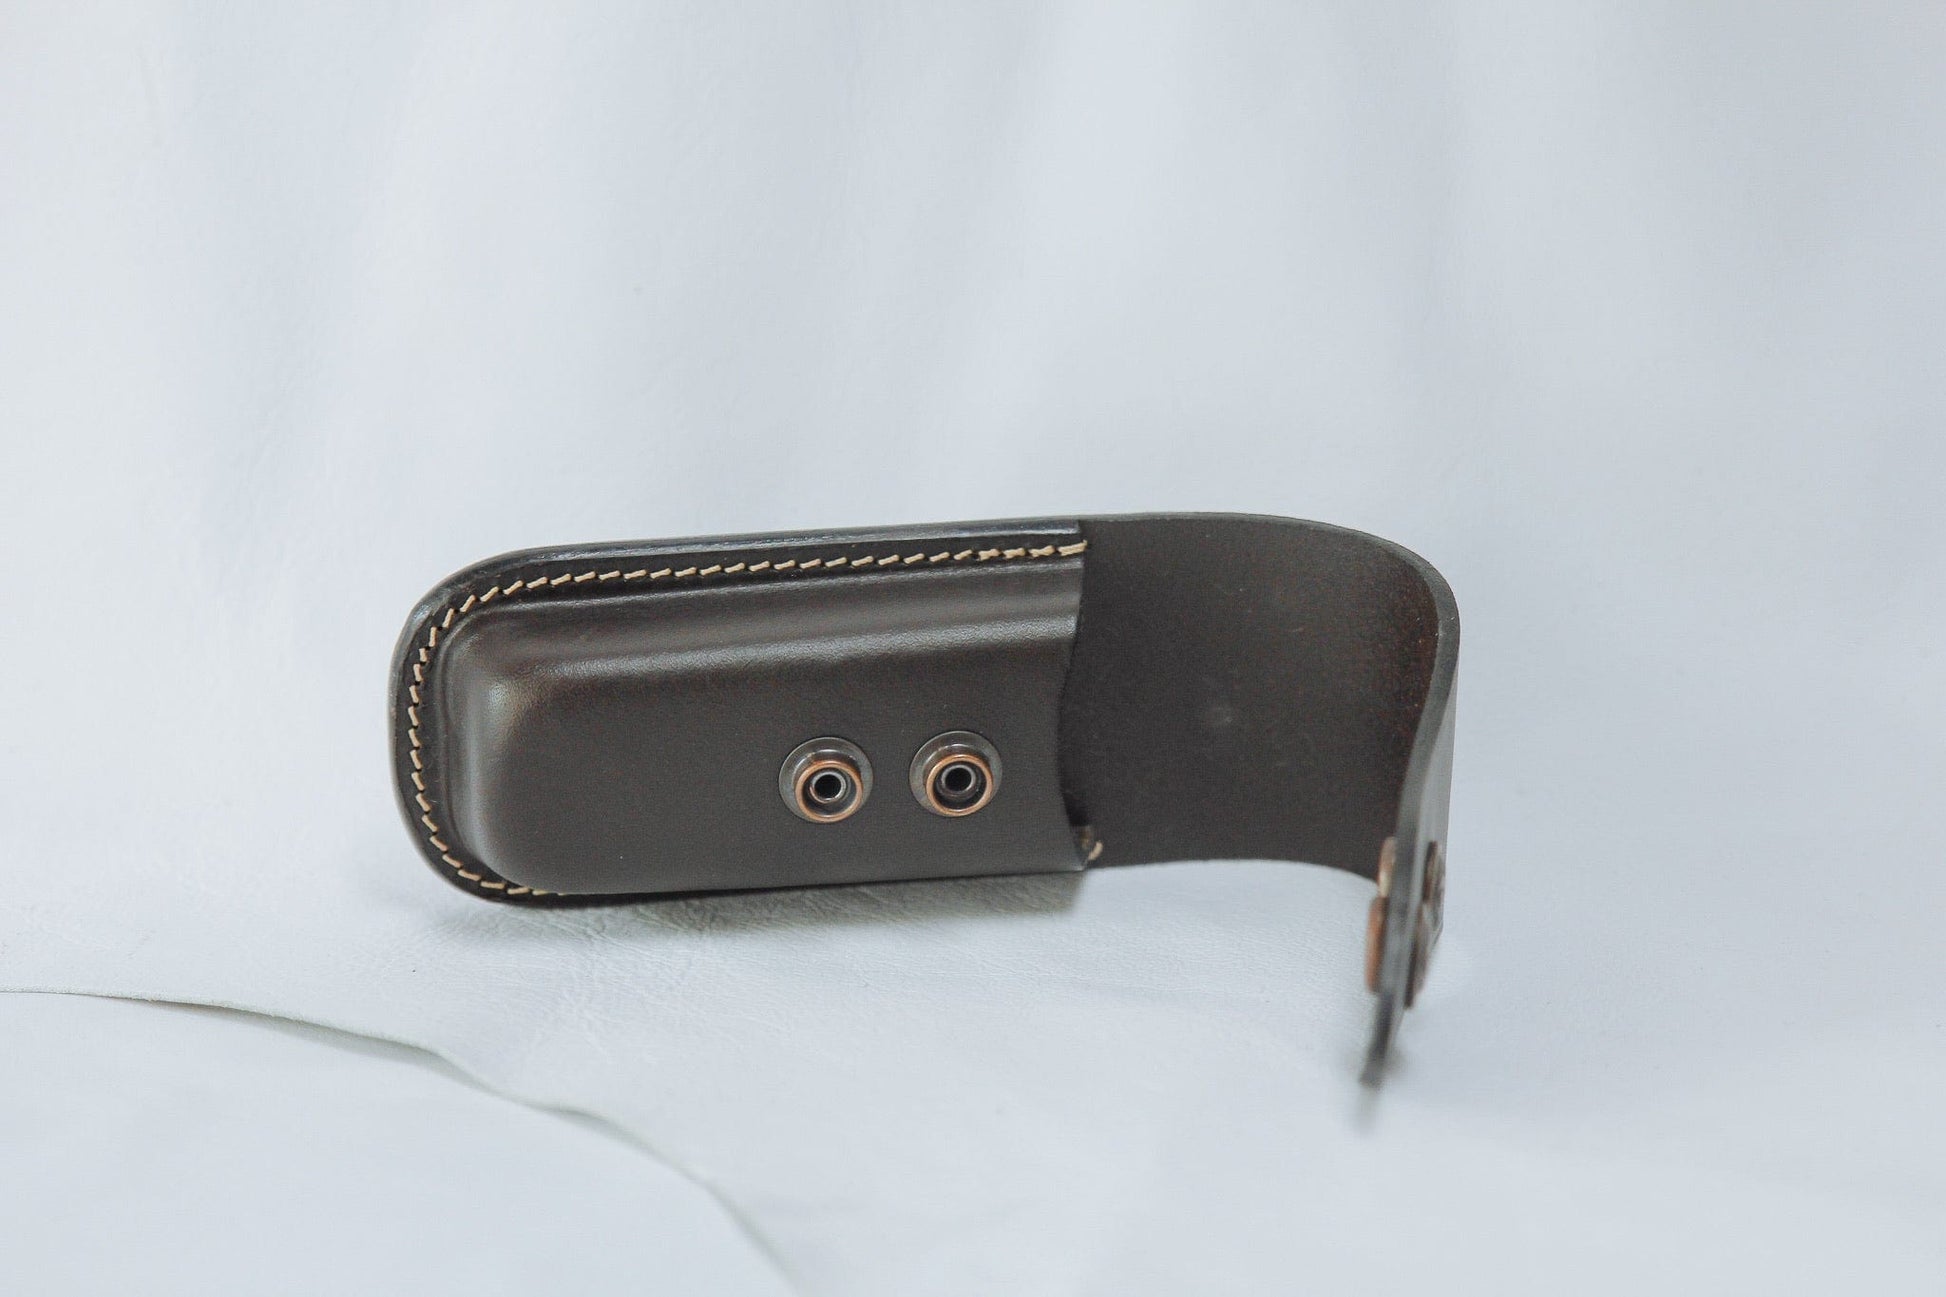 The Real McCaul Leathergoods Leatherman Knife Multitool Pouch for Belt Australian Made Australian Owned Leatherman Knife Pouch Cowhide Australian Made Belt